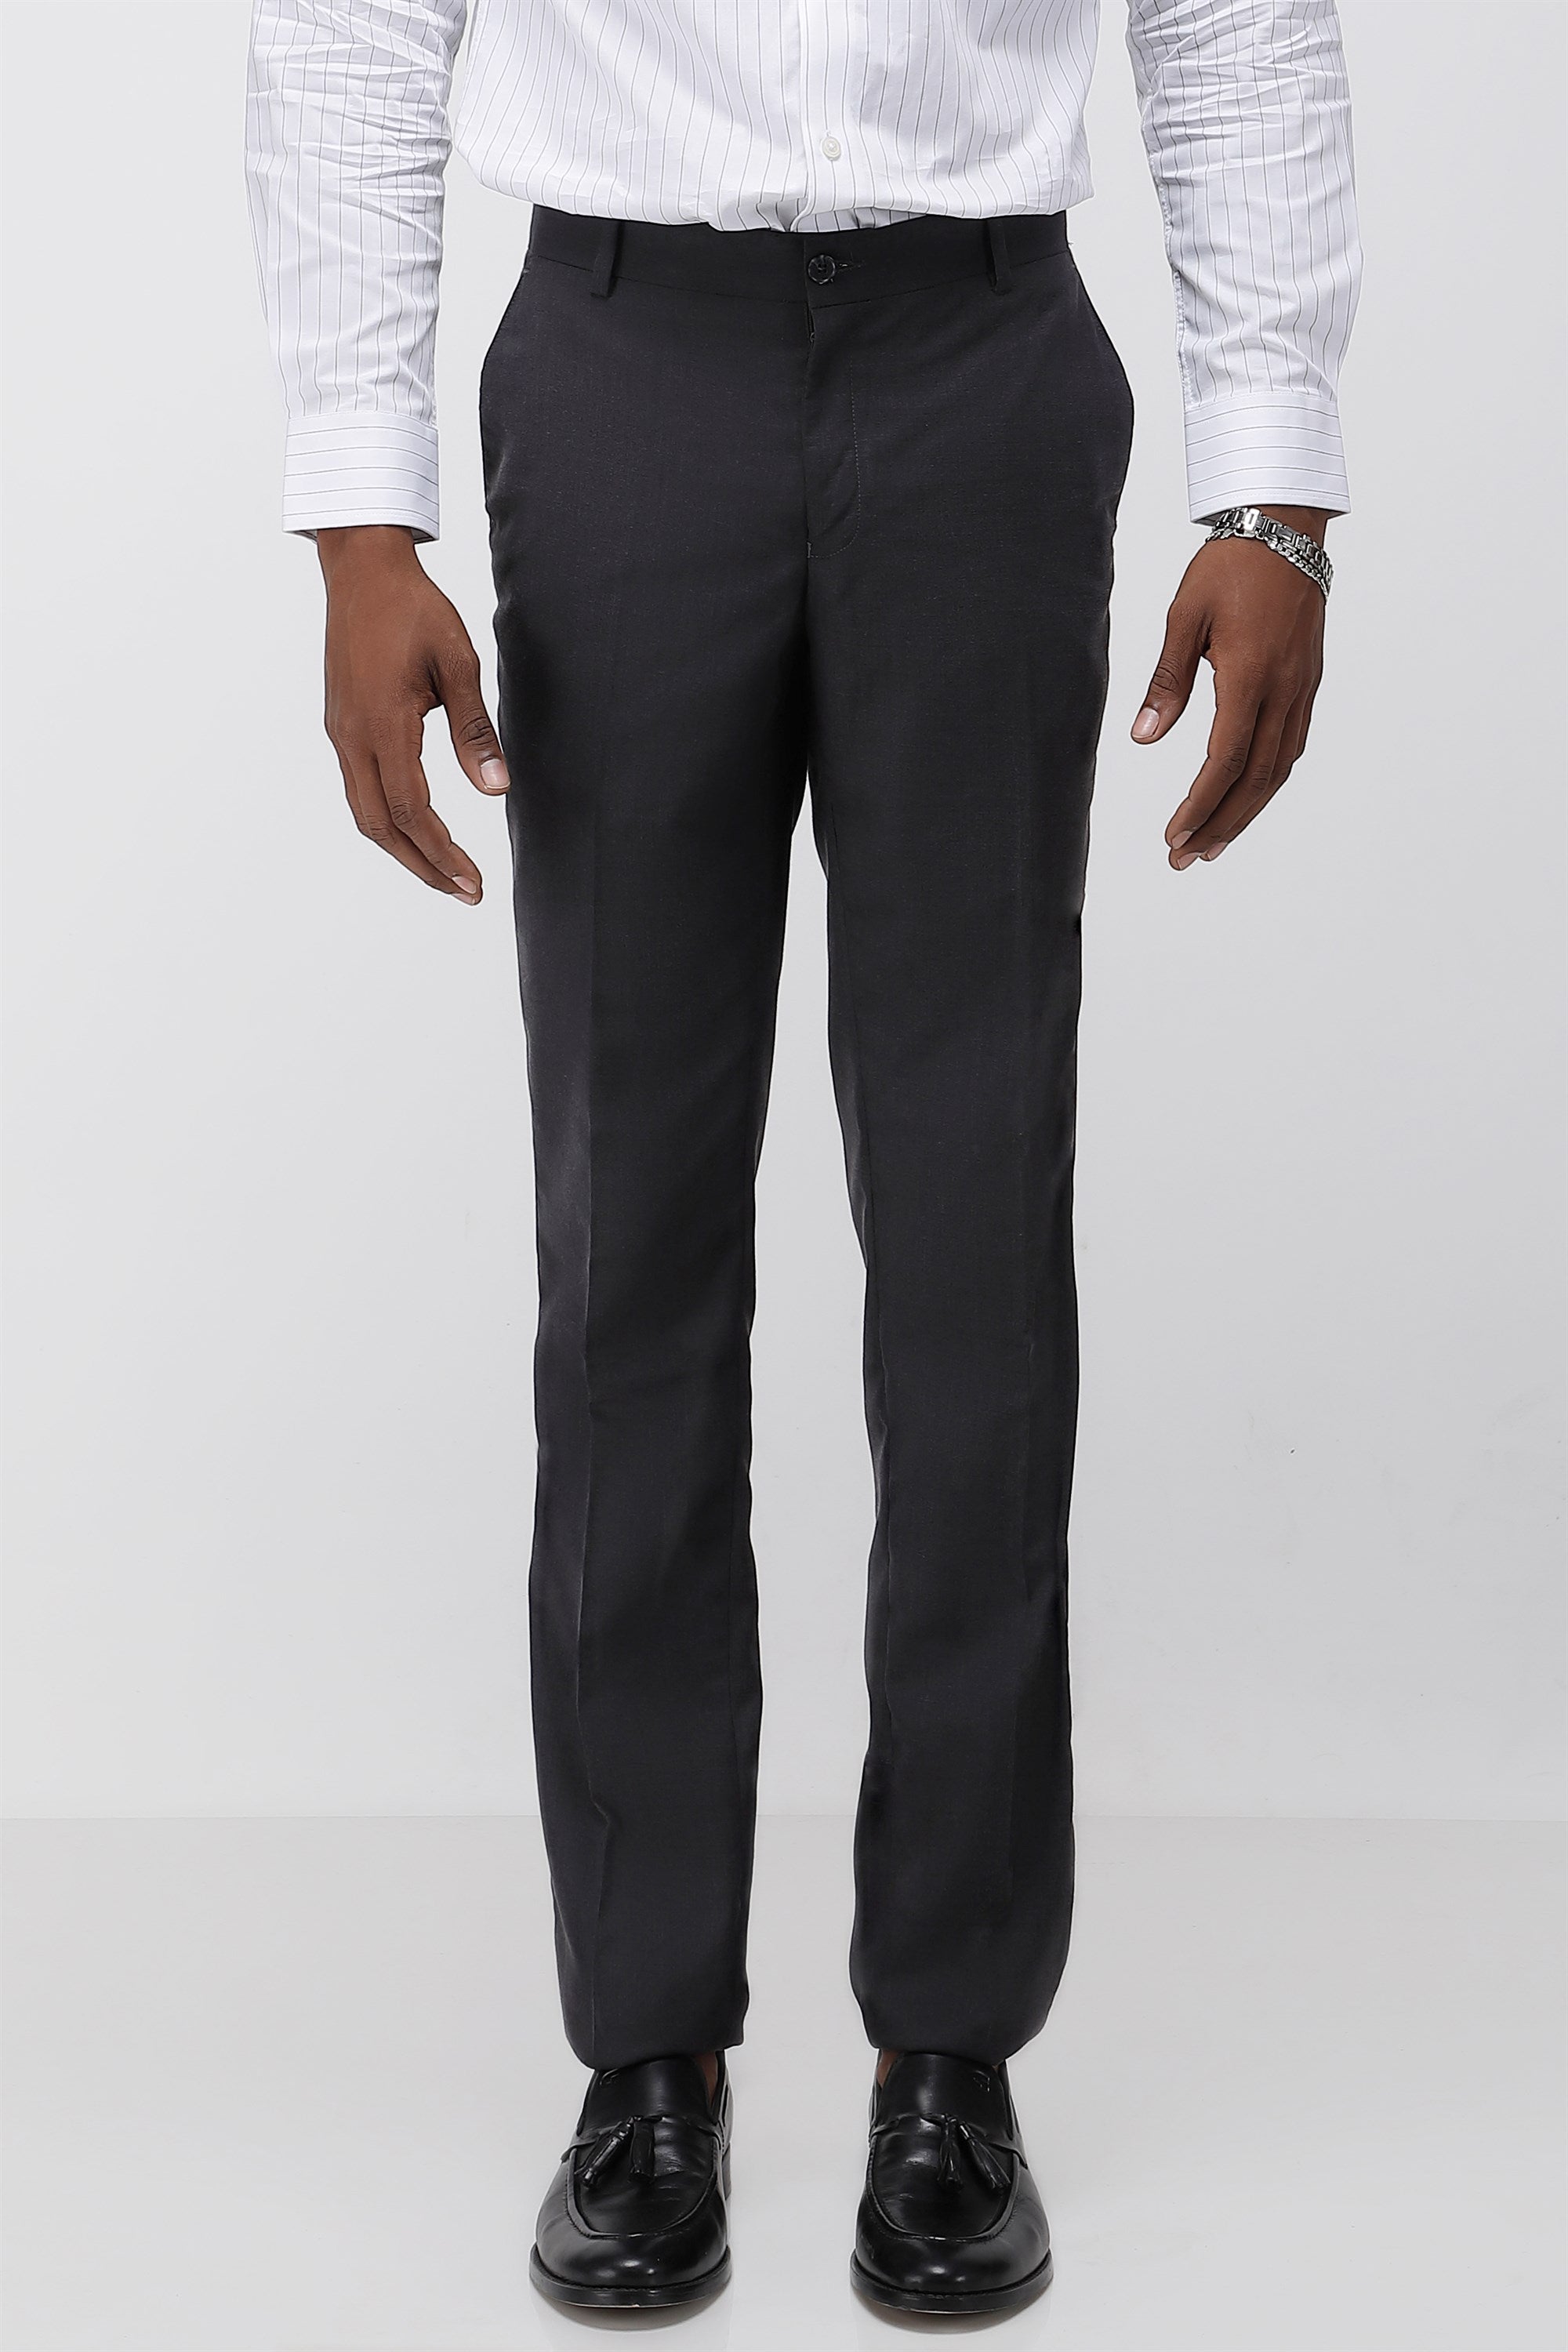 Dark Olive Corduroy Trousers -Stancliffe Flat-Front in 8-Wale Cotton by  Fort Belvedere